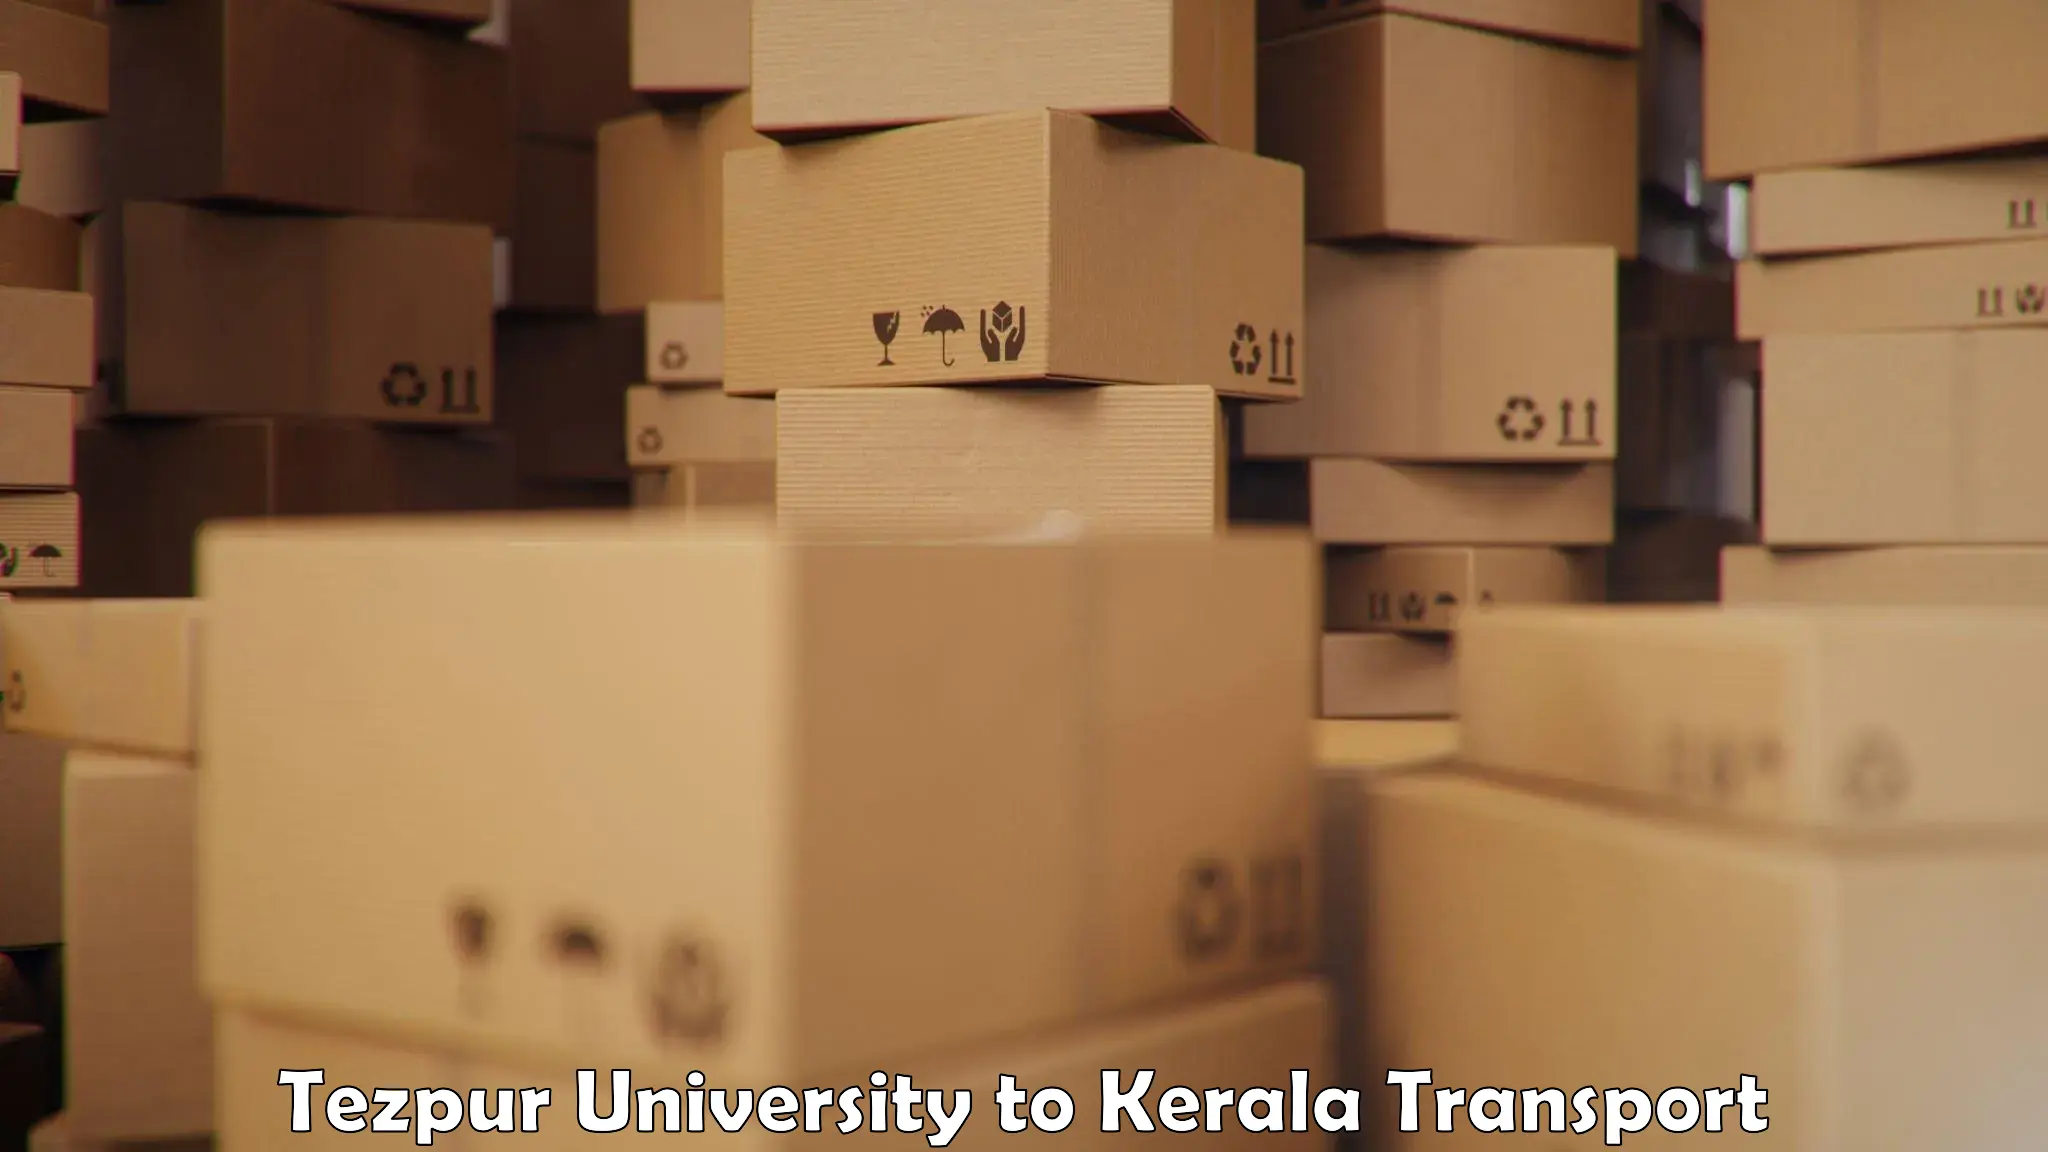 Goods delivery service Tezpur University to Kasaragod